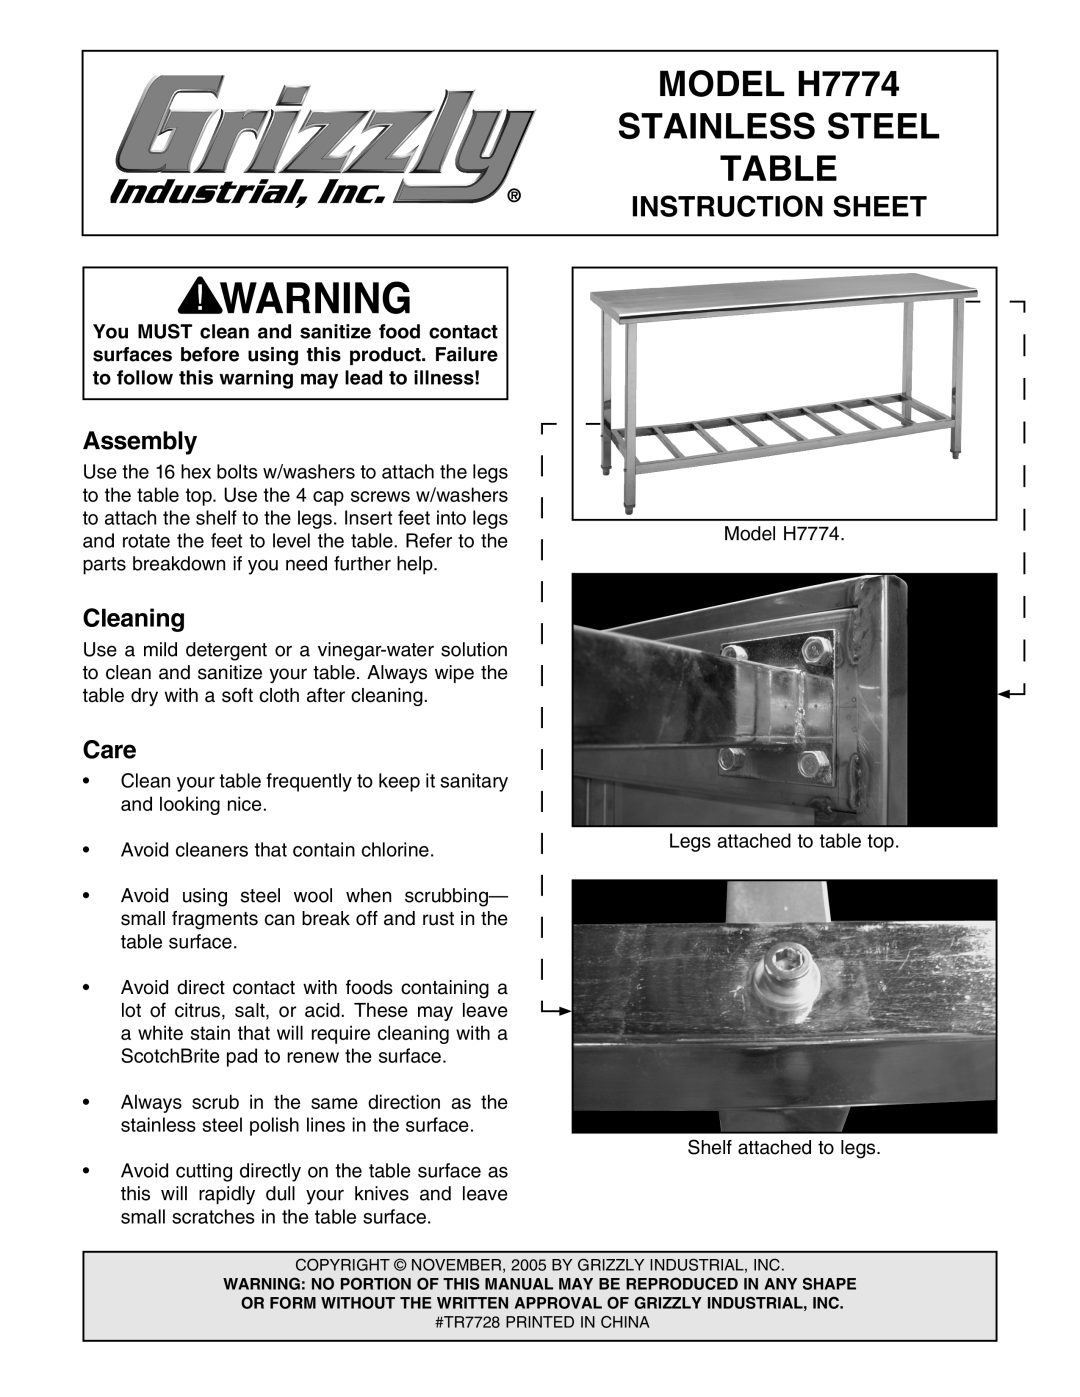 Grizzly instruction sheet MODEL H7774, Stainless Steel, Instruction Sheet, Assembly, Cleaning, Care 